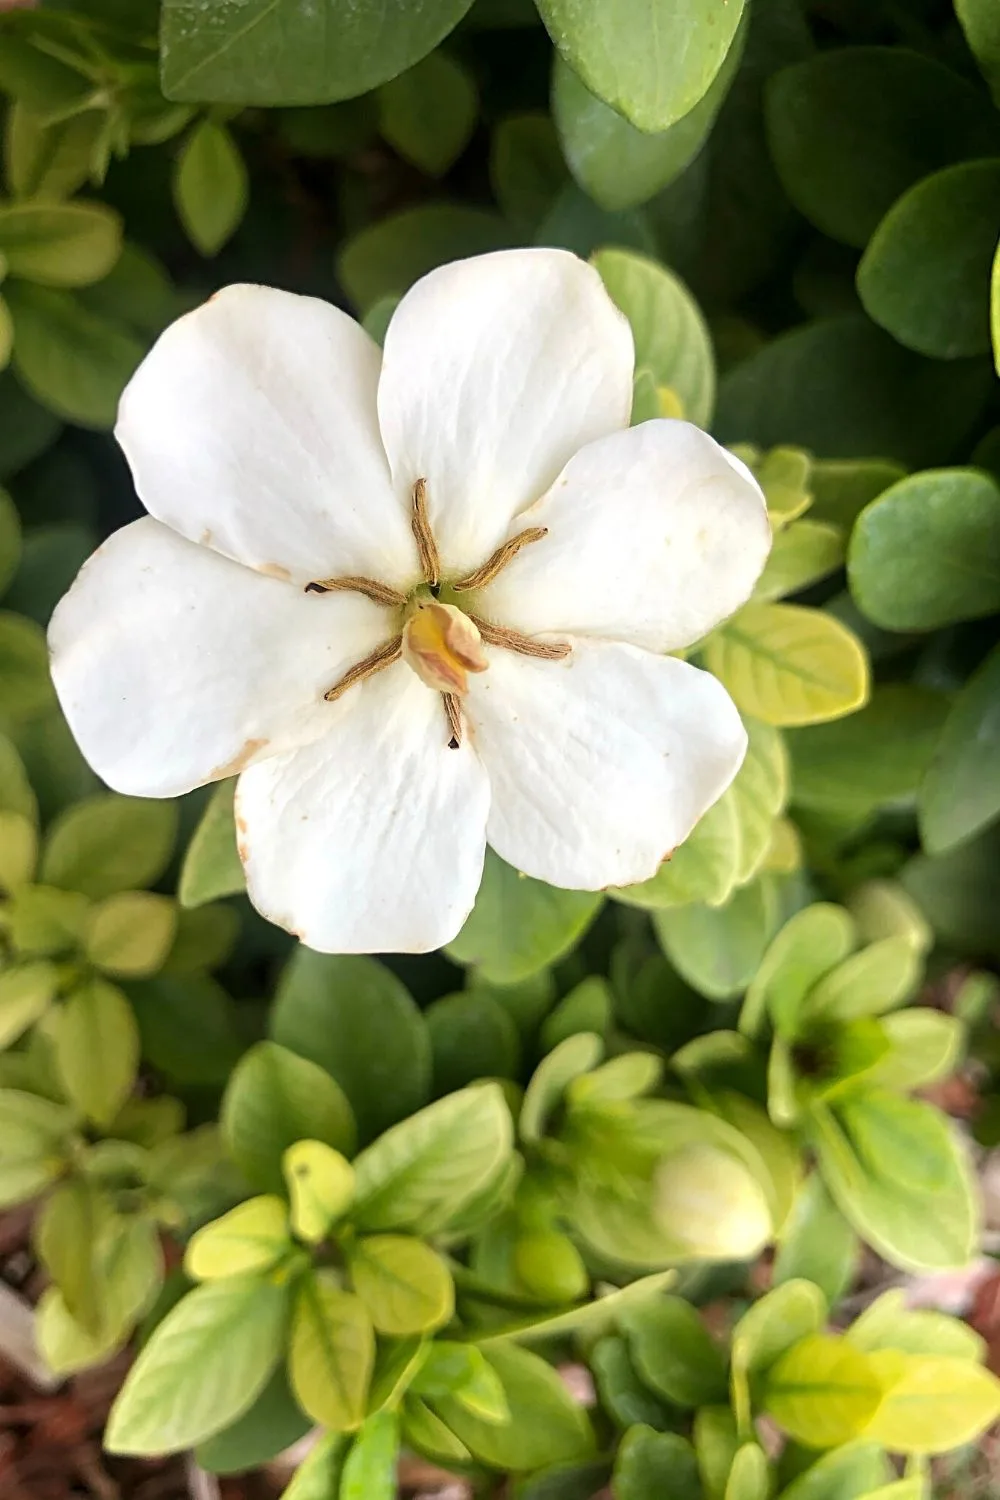 Gardenia, with its green foliage and white flowers, can easily beautify your northeast-facing window